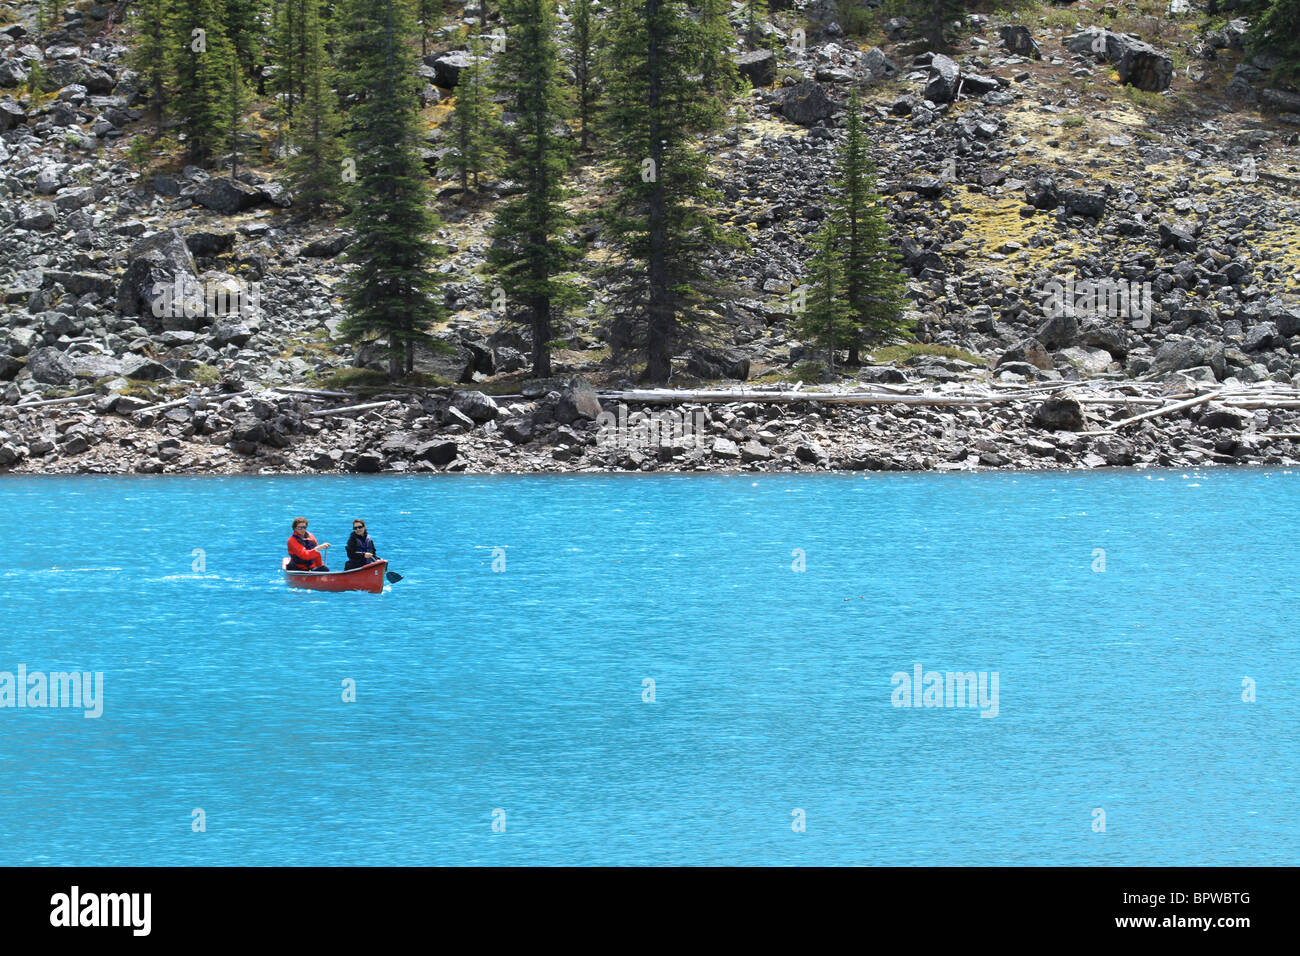 Couple paddles a bright red canoe across beautiful blue glacier lake in Banff National Park, Alberta, Canada. Stock Photo